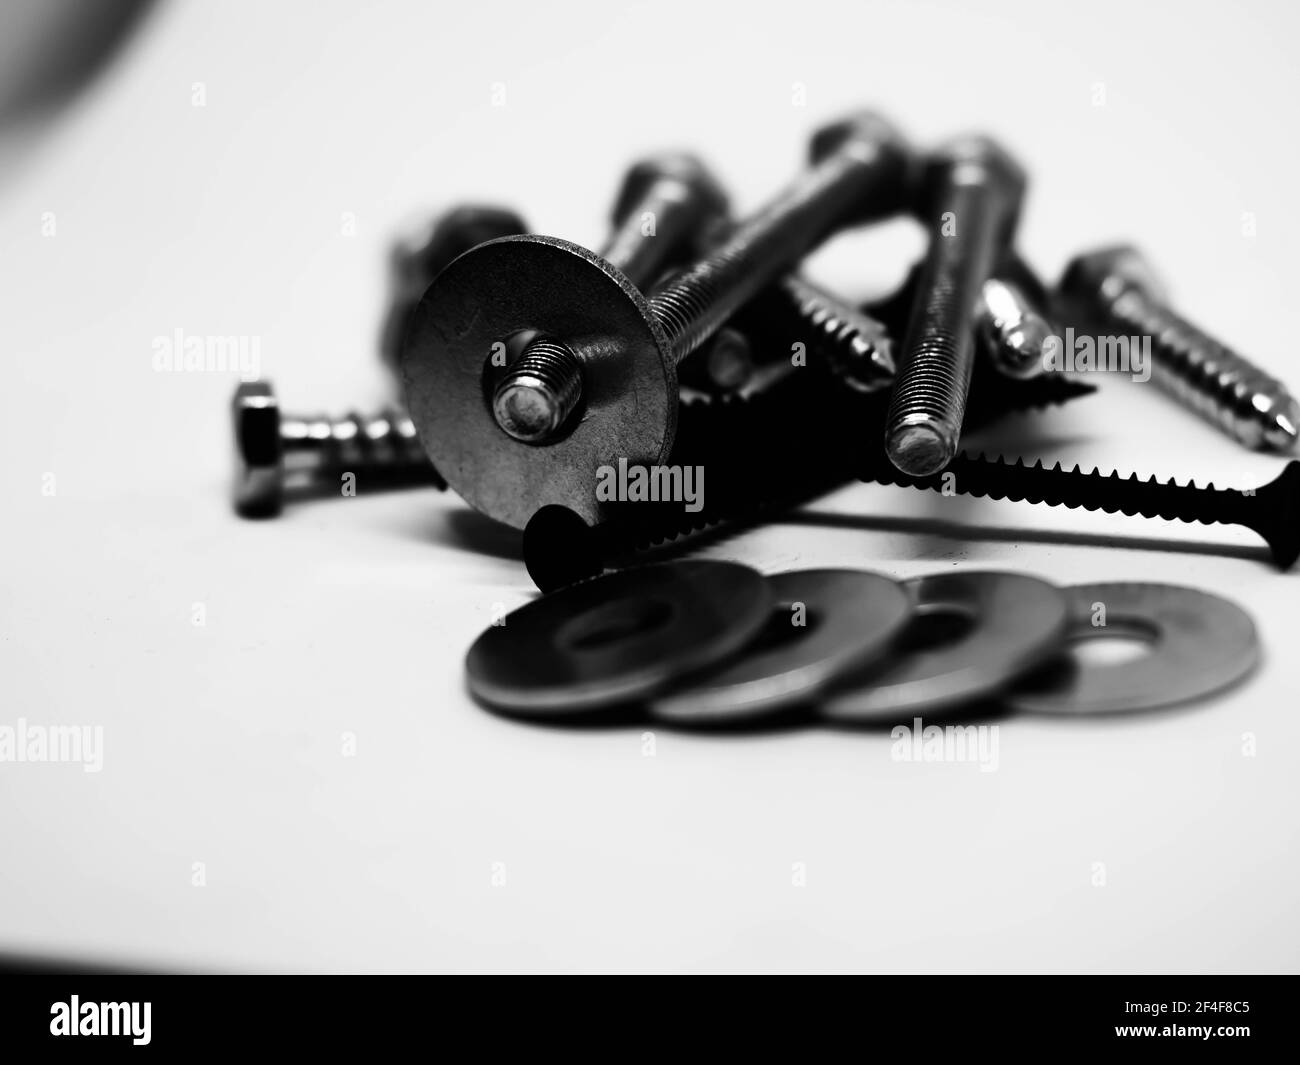 Screw and nuts. Industrial object. Stock Photo